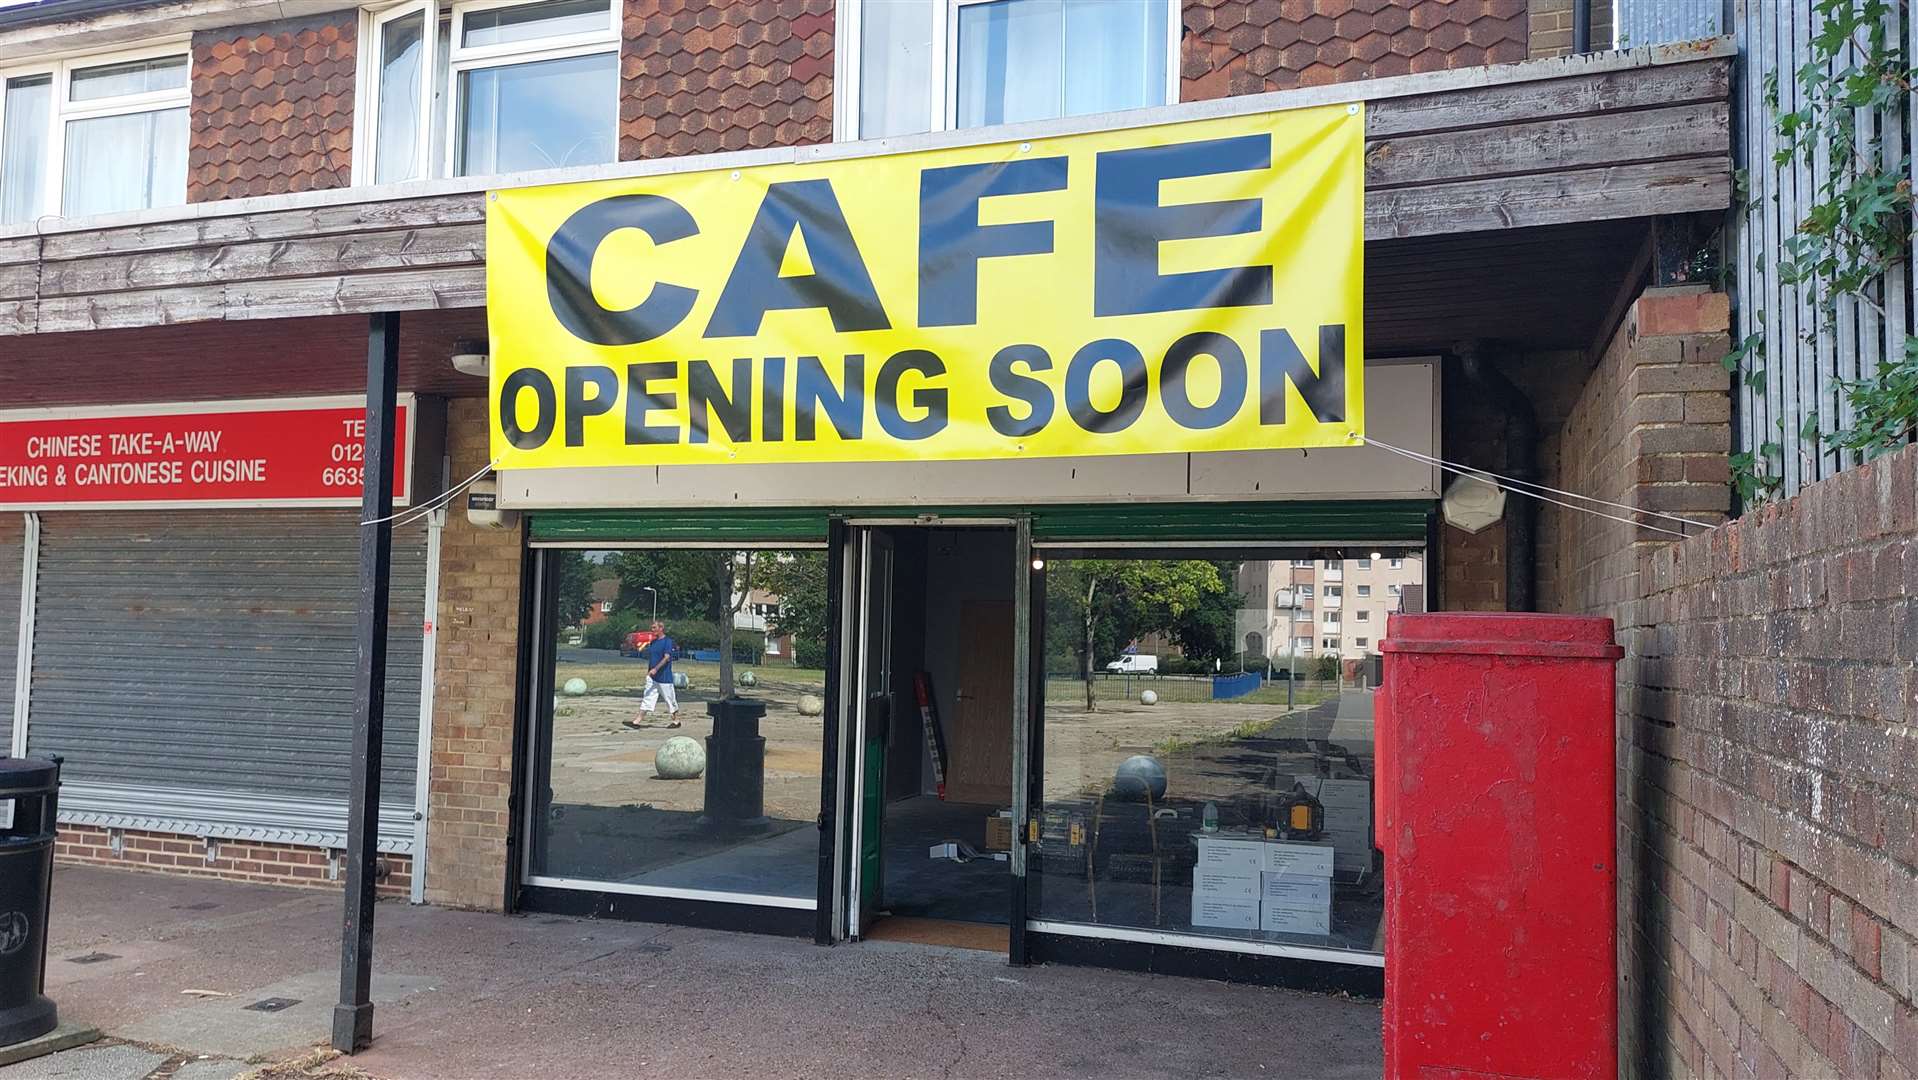 The former Post Office and Bockhanger Barbers site will now become a cafe